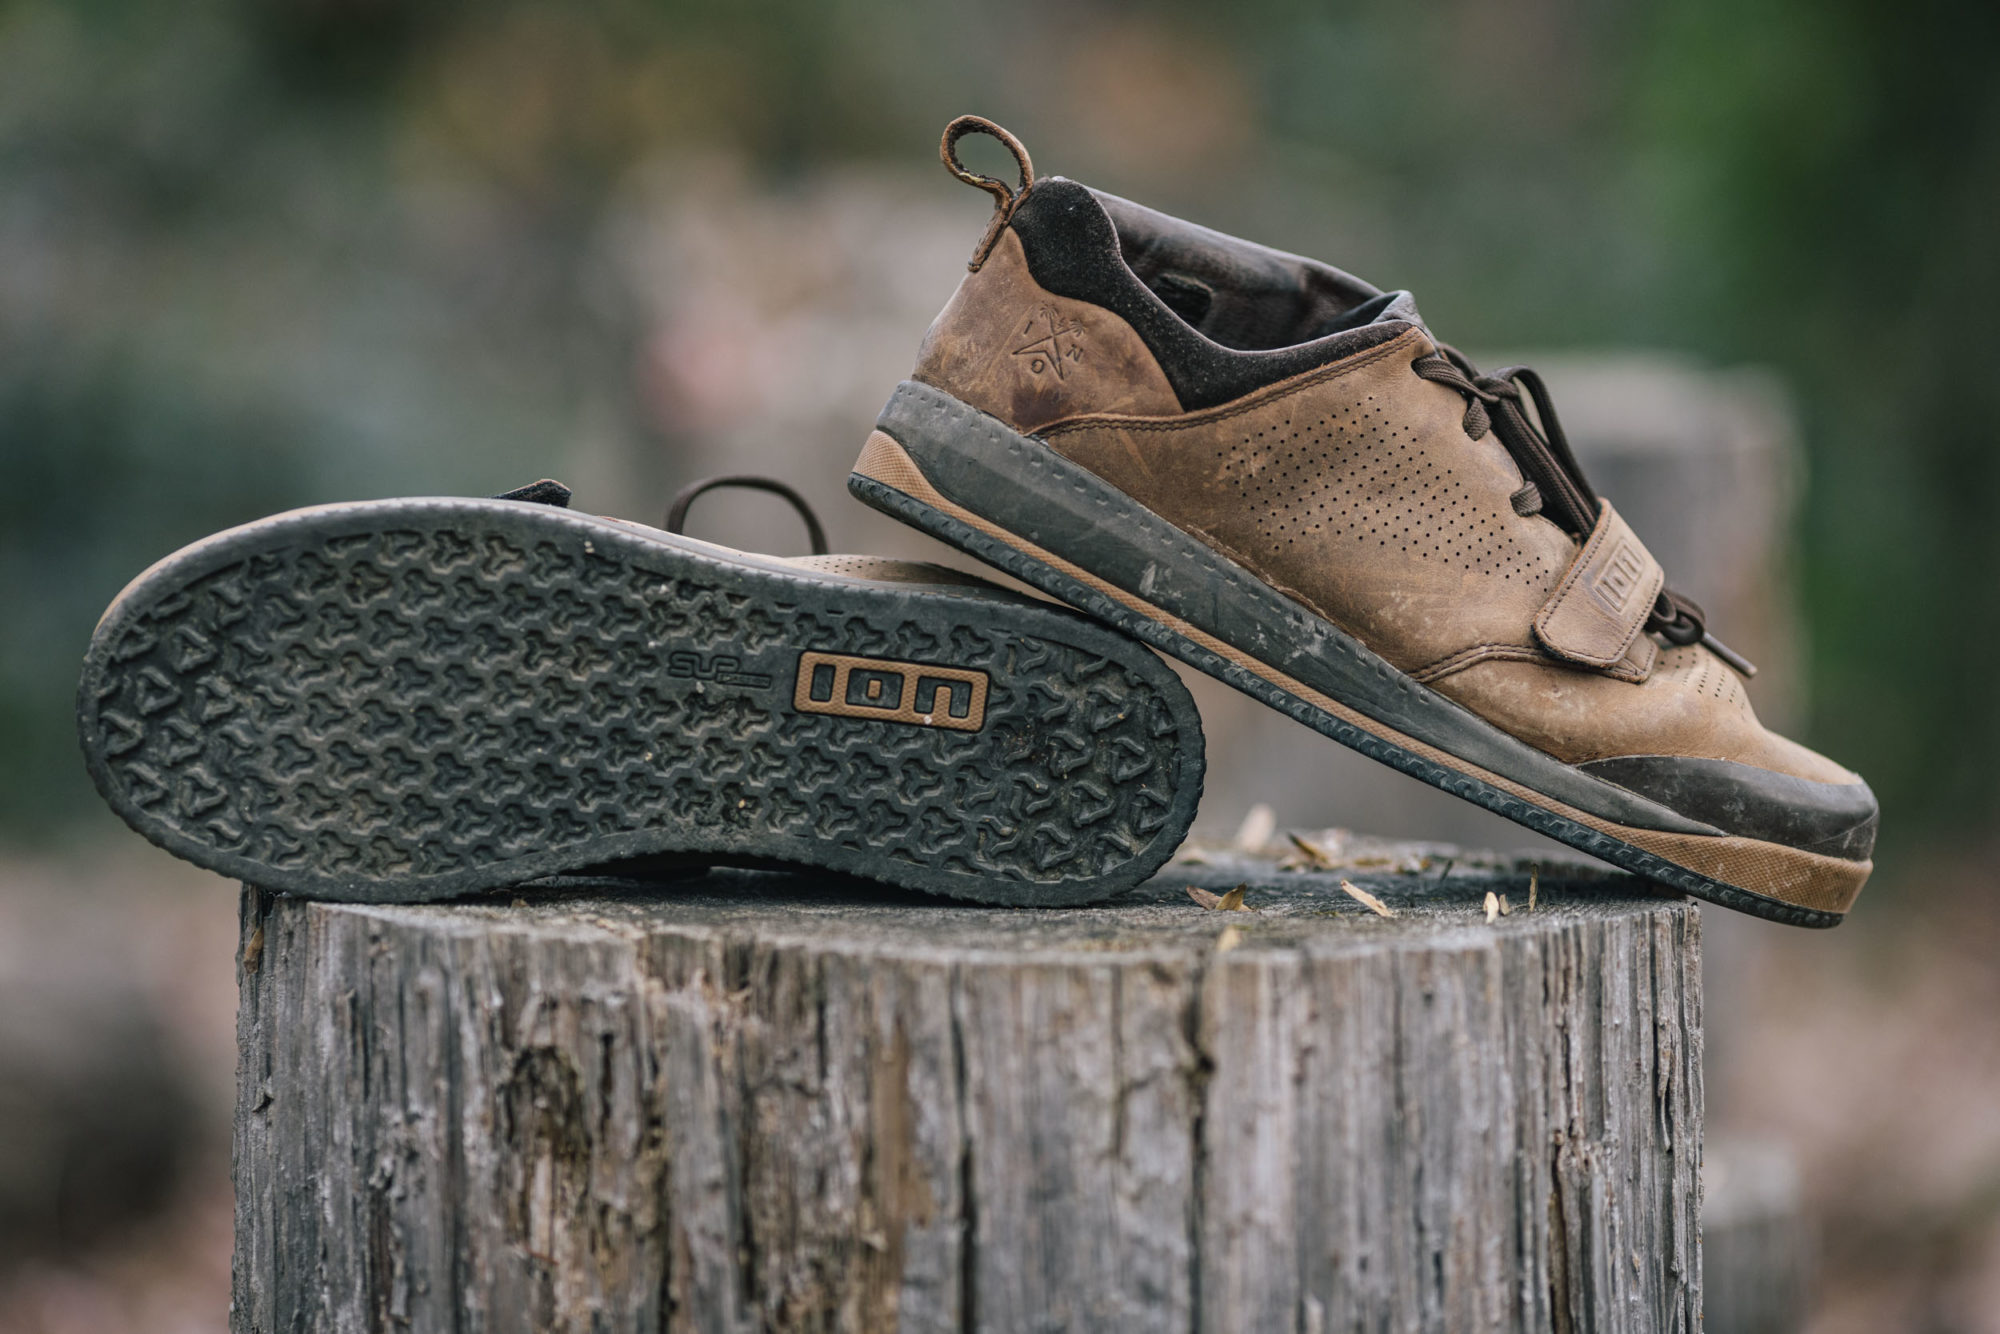 Ion Scrub Select Shoes, Flat pedal shoes for cold weather